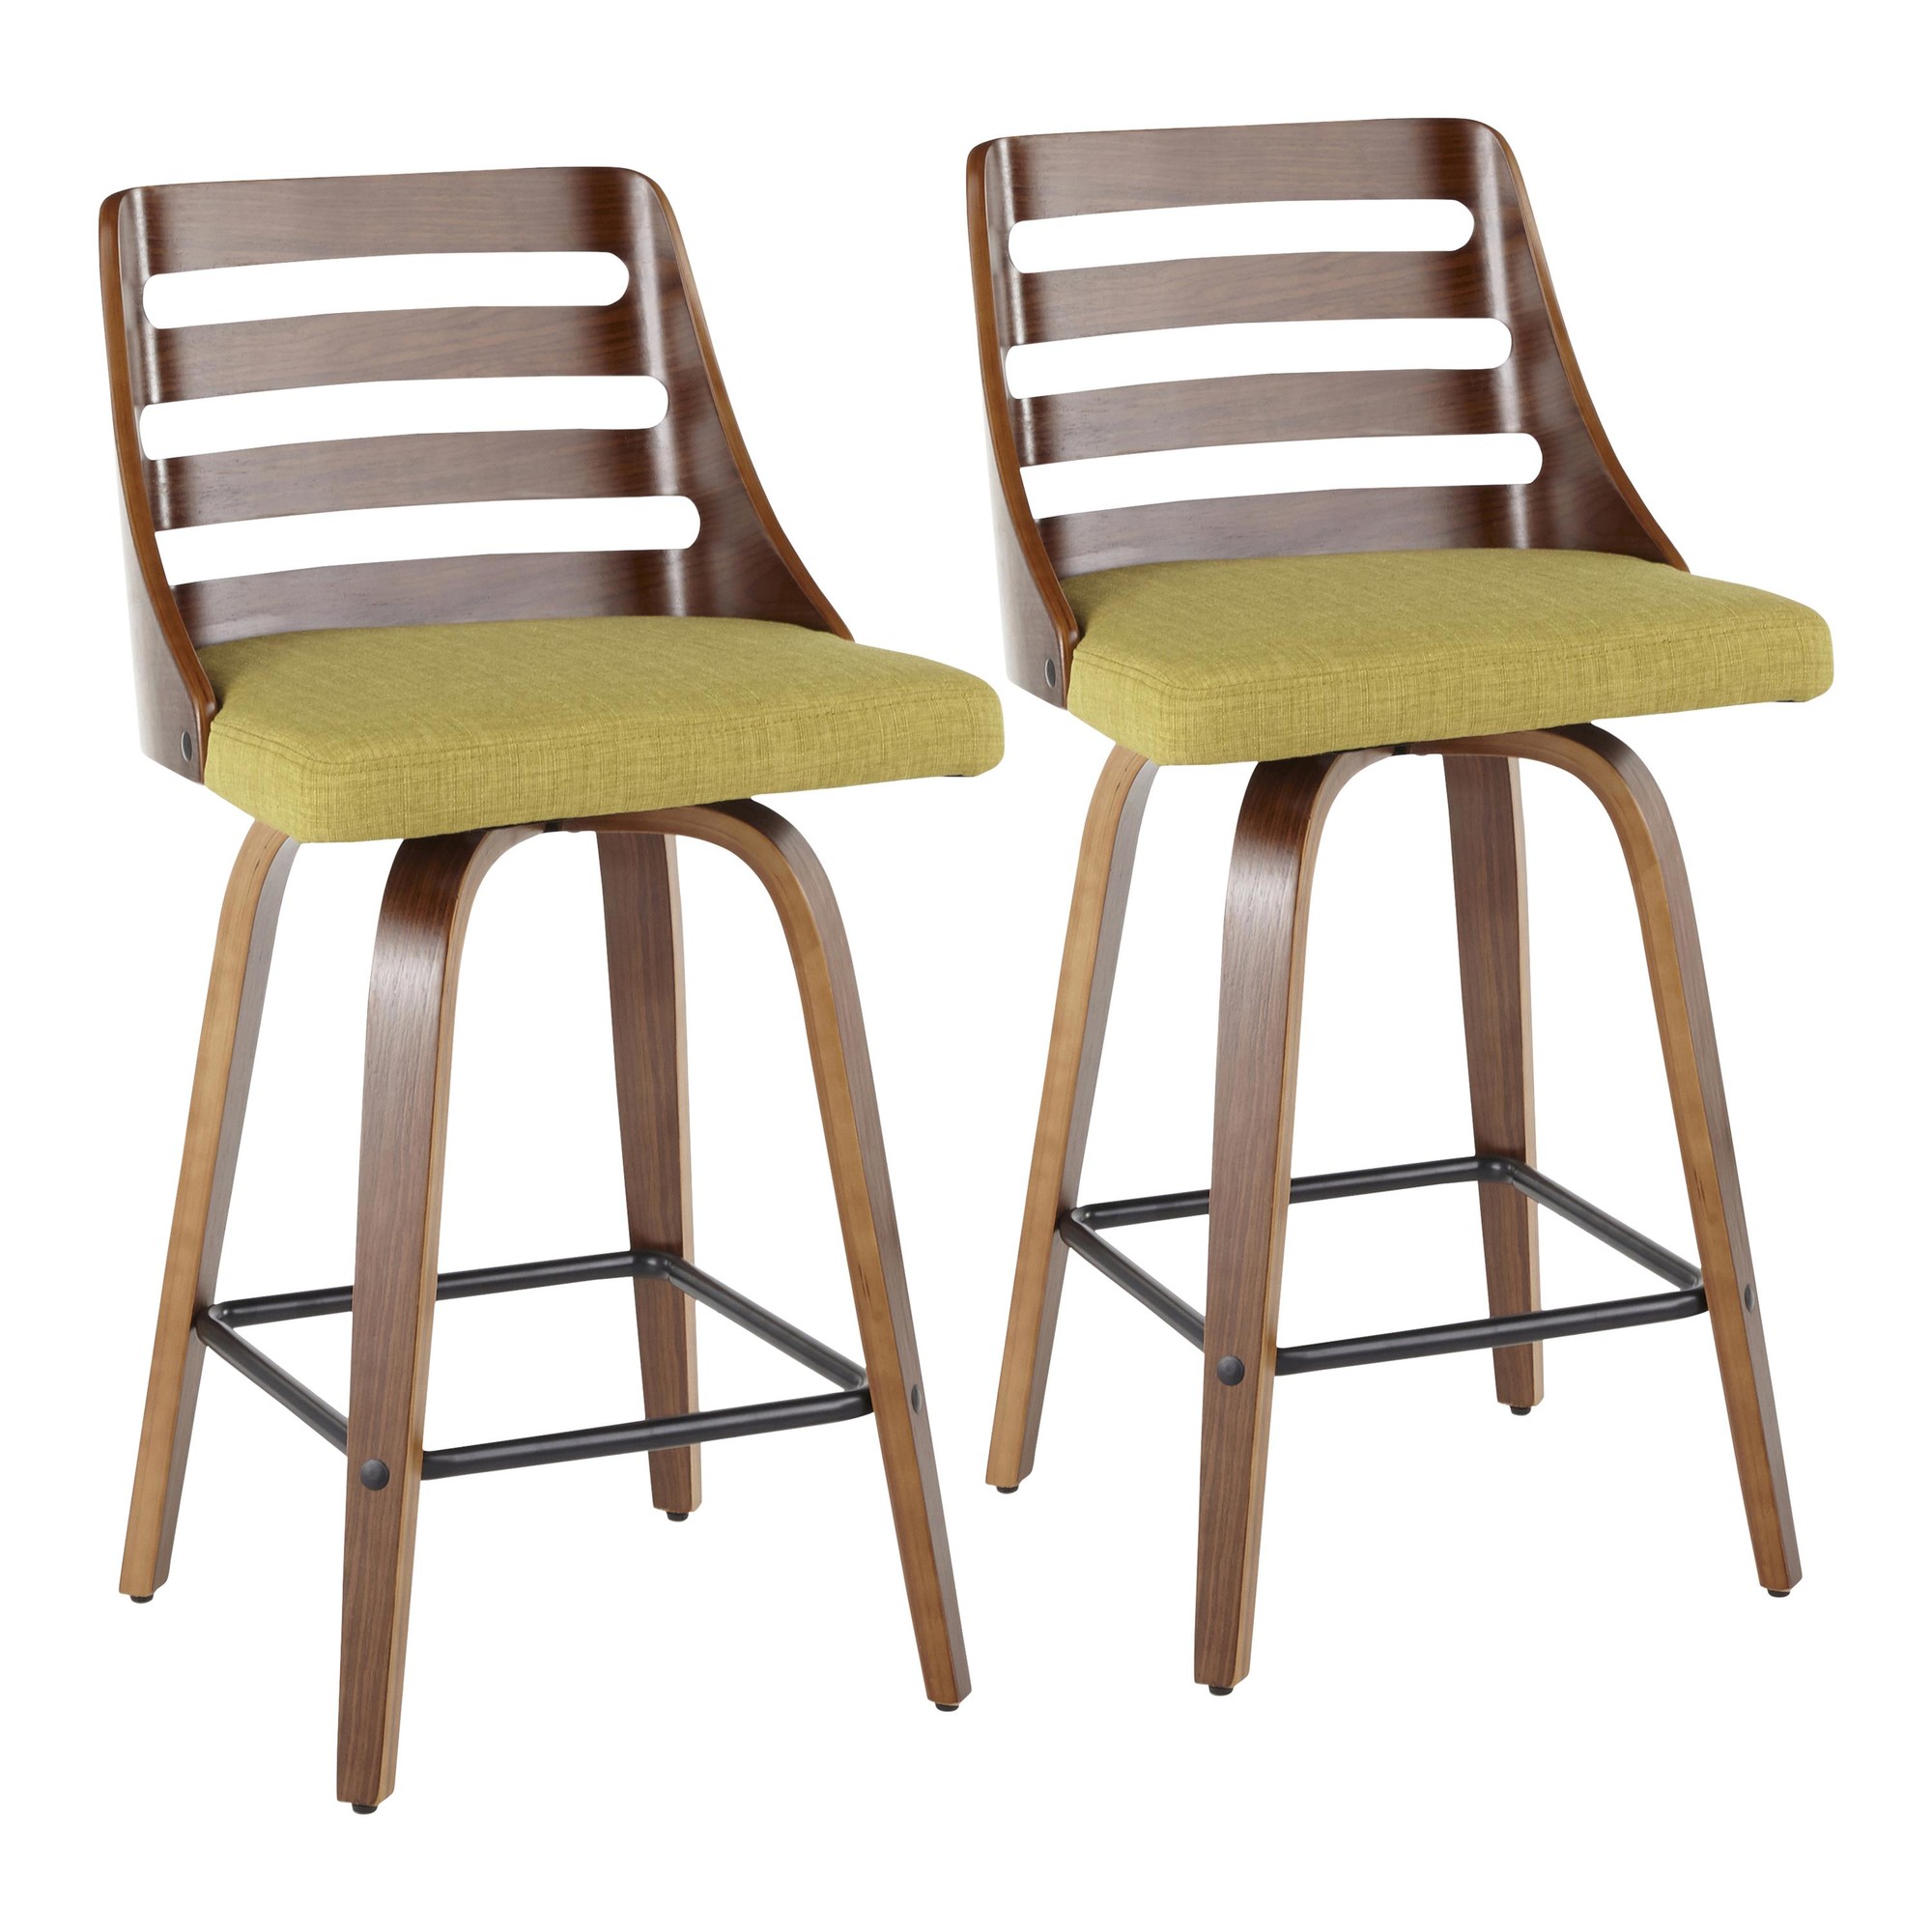 Affordable Counter Stools - Stools Item